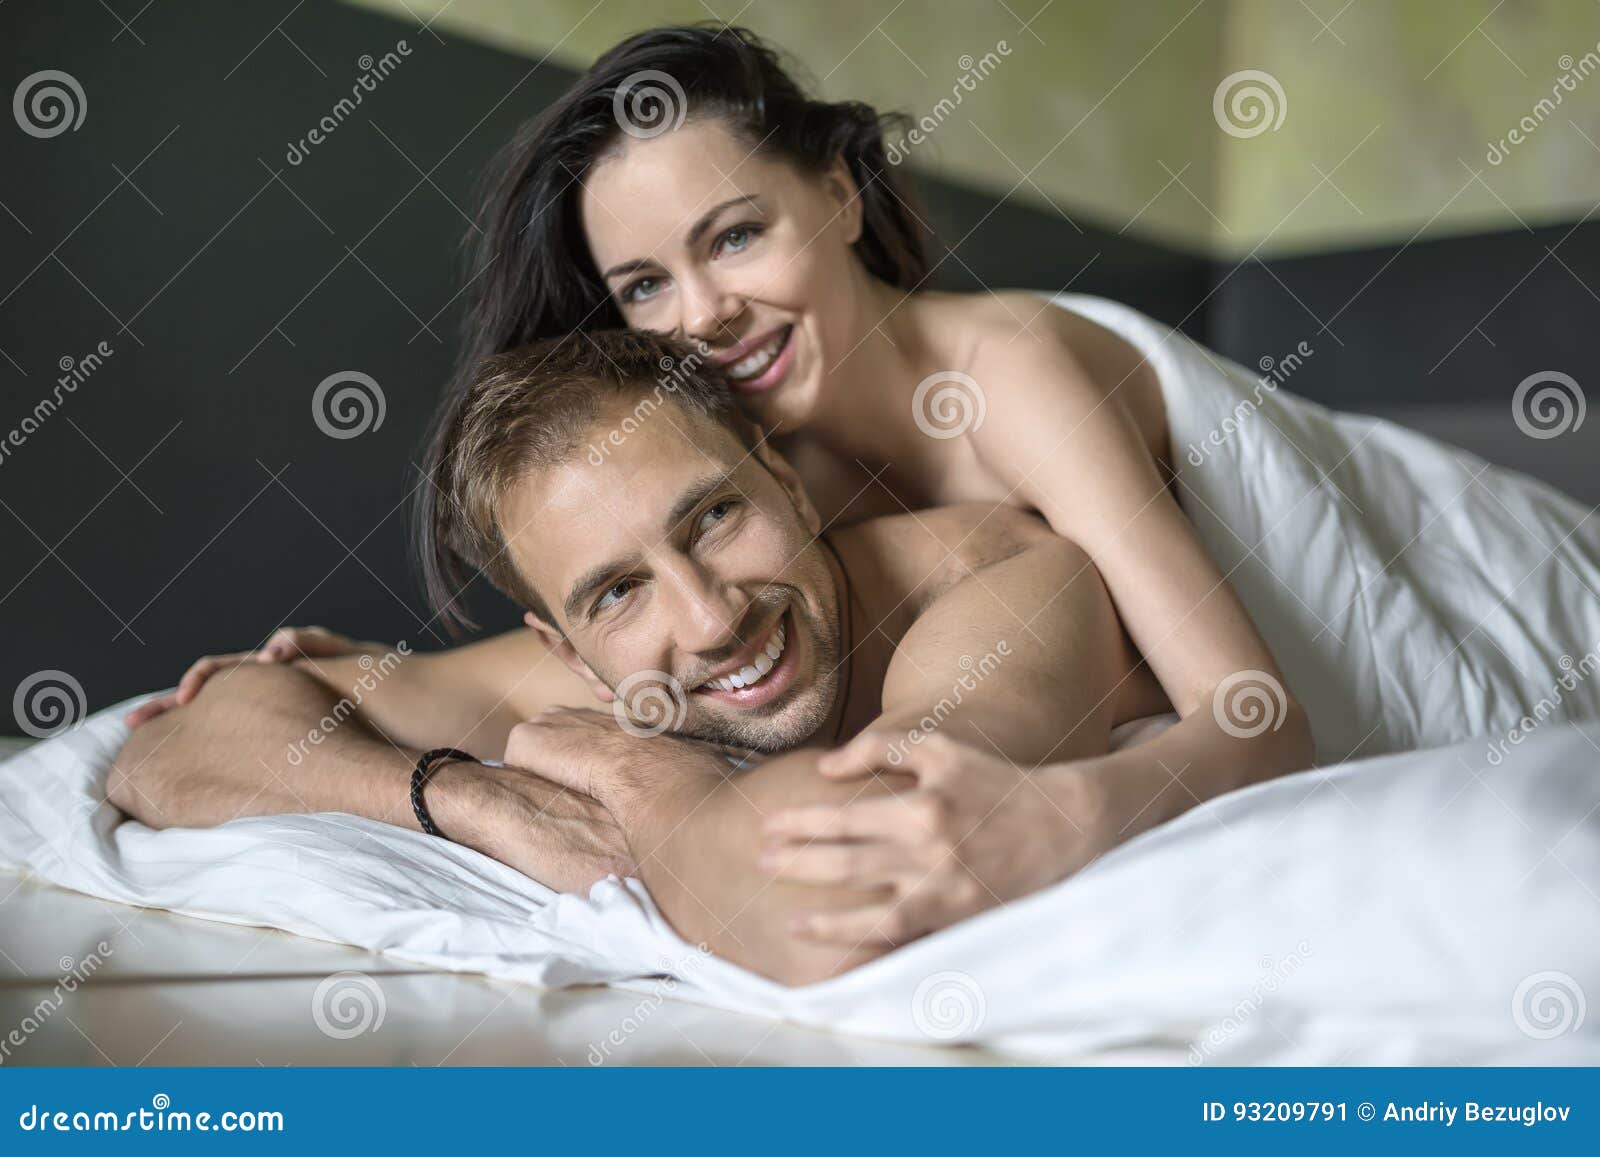 Hugging couple stock image picture